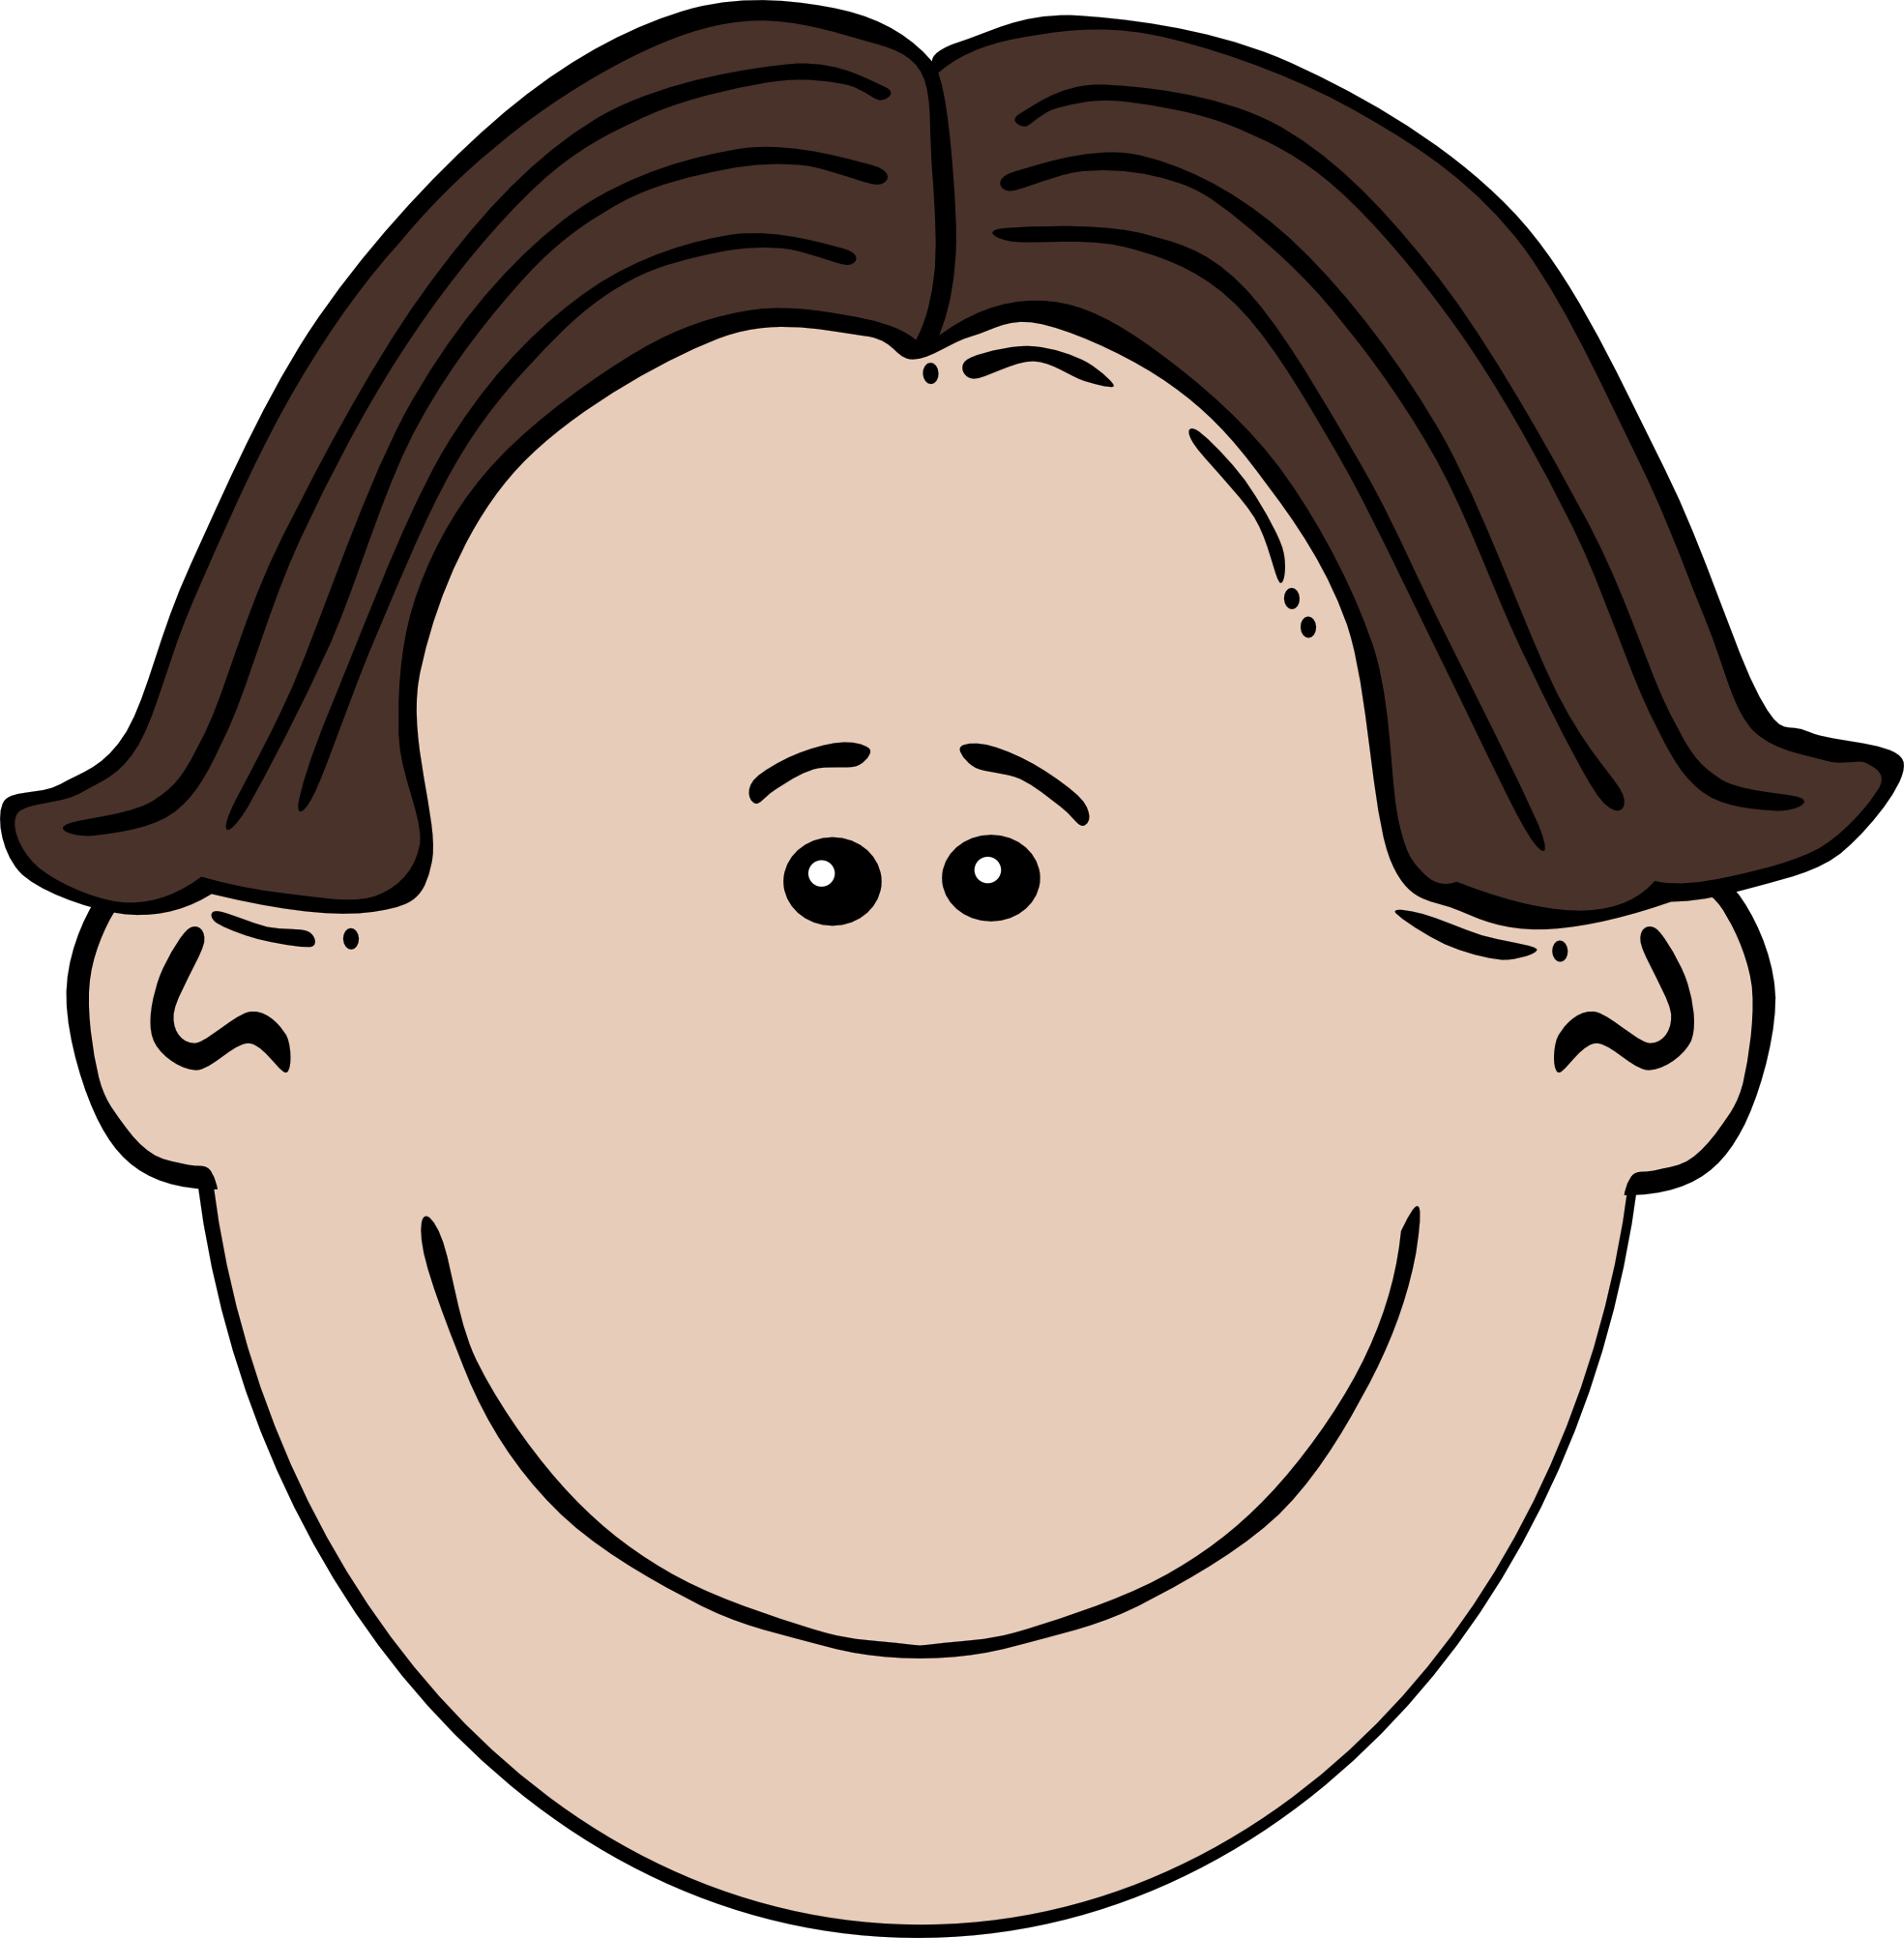 Cartoon Face Images - Cliparts.co